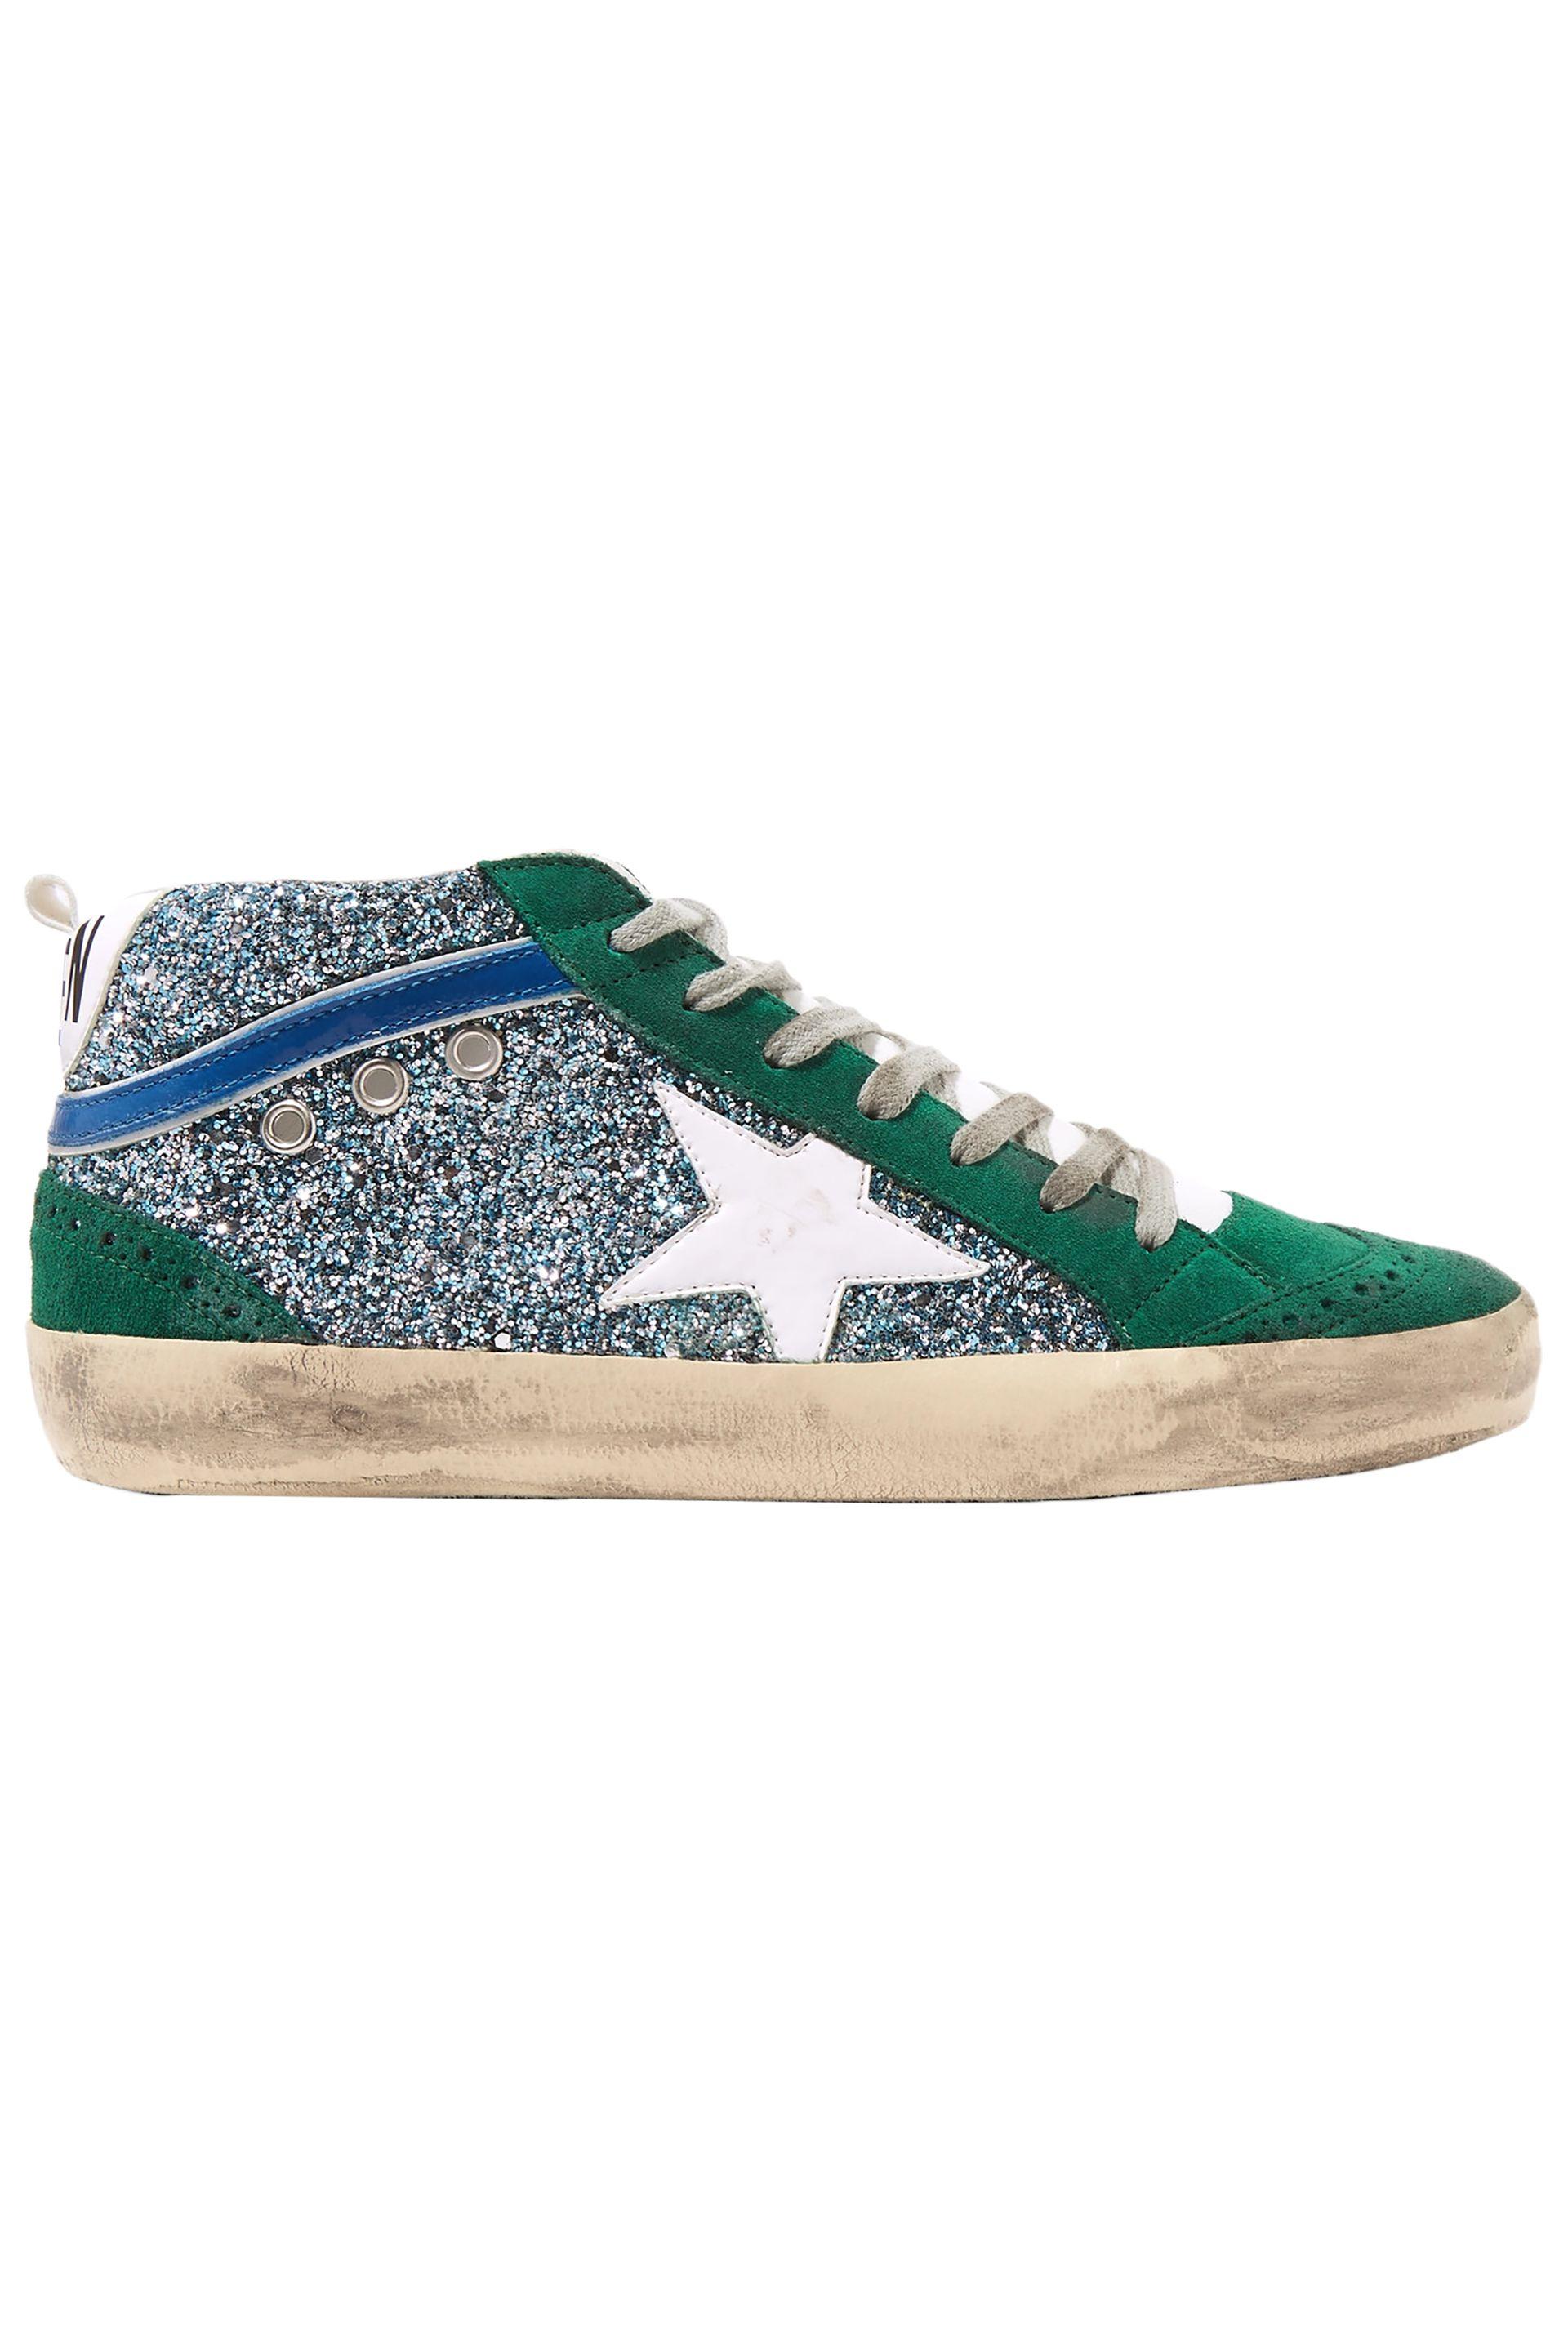 Golden Goose Mid Glitter Suede And Leather Sneakers | Lyst